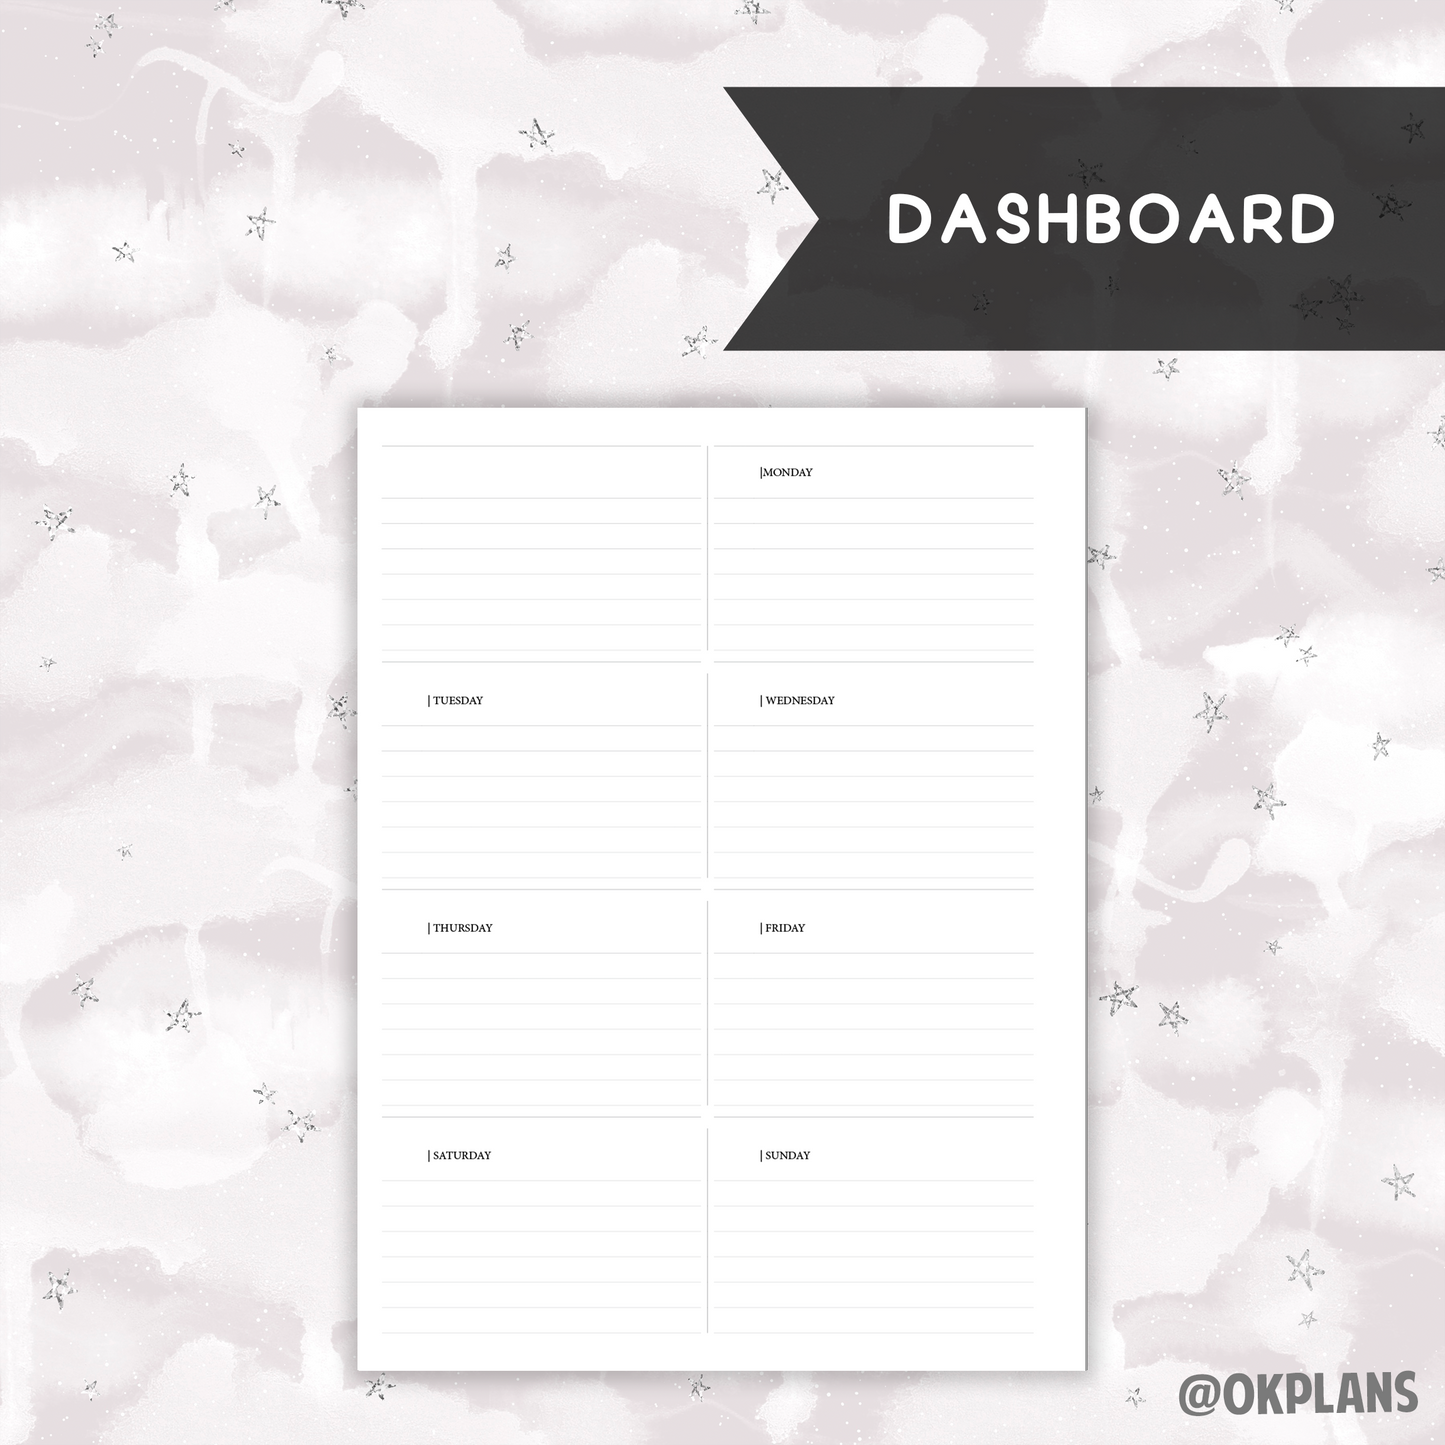 *UNDATED* Classic Dashboard Overview Planner - Pick Monthly and Weekly Option